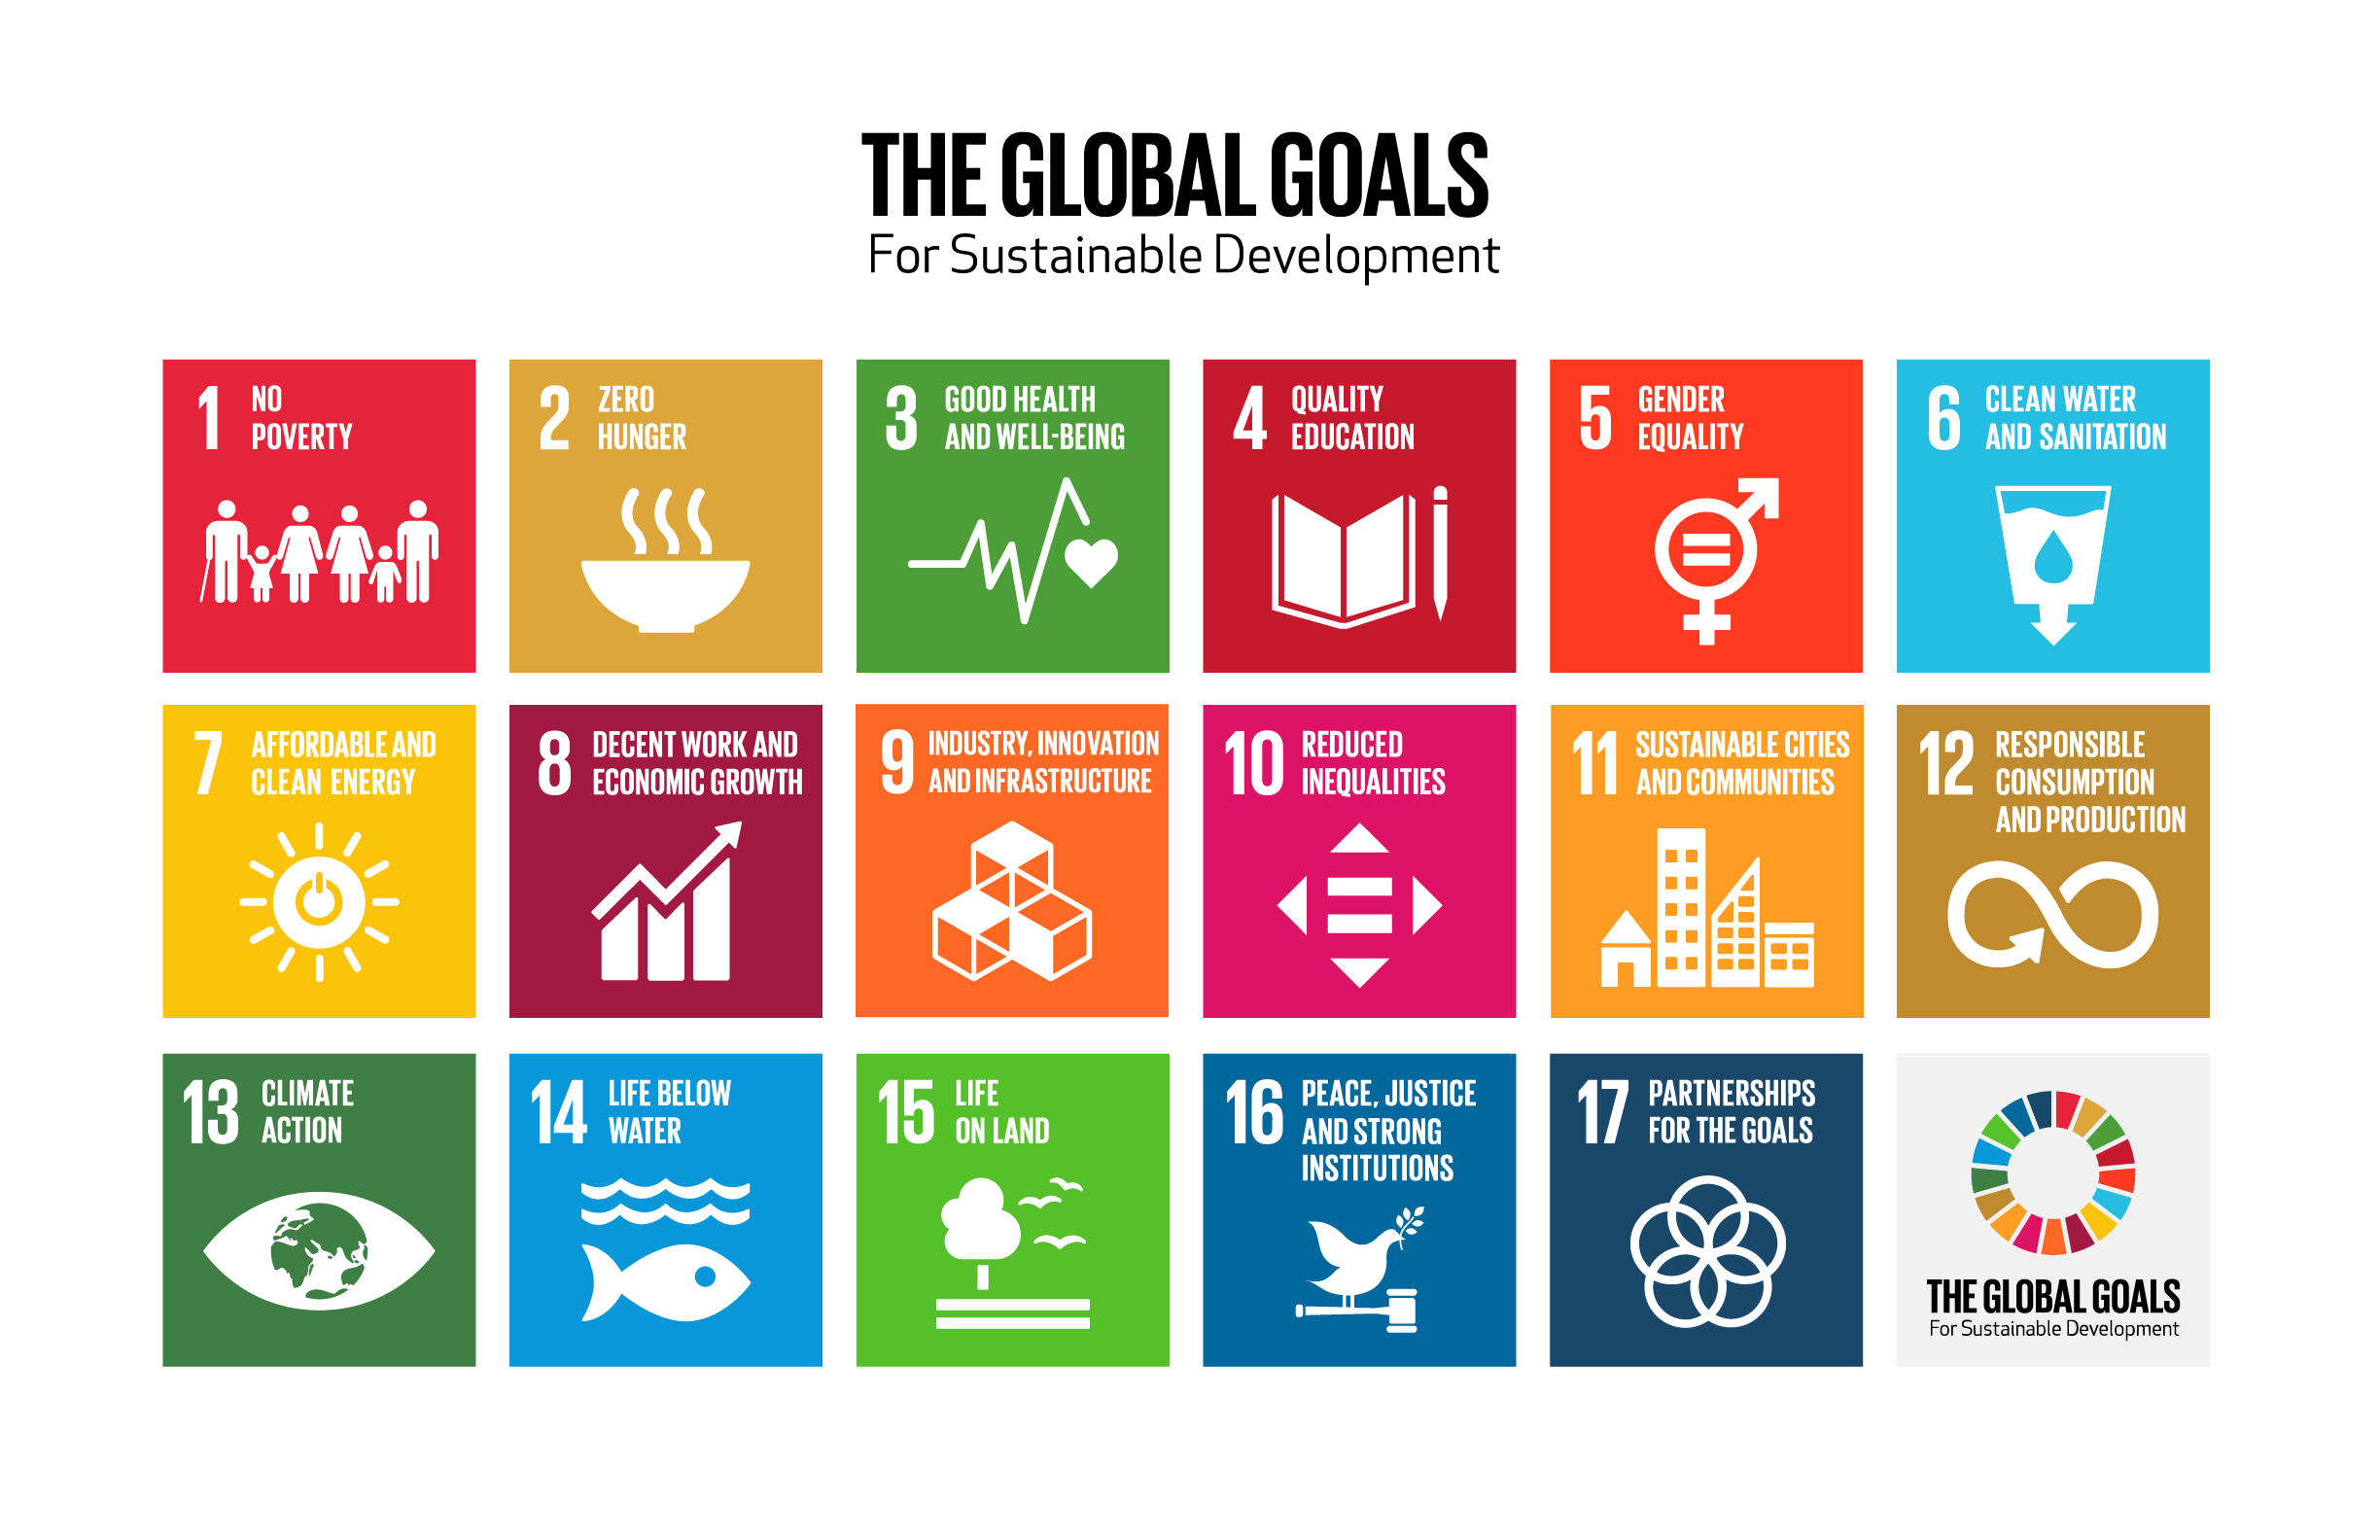 The official icon grid for the UN's 17 Goals